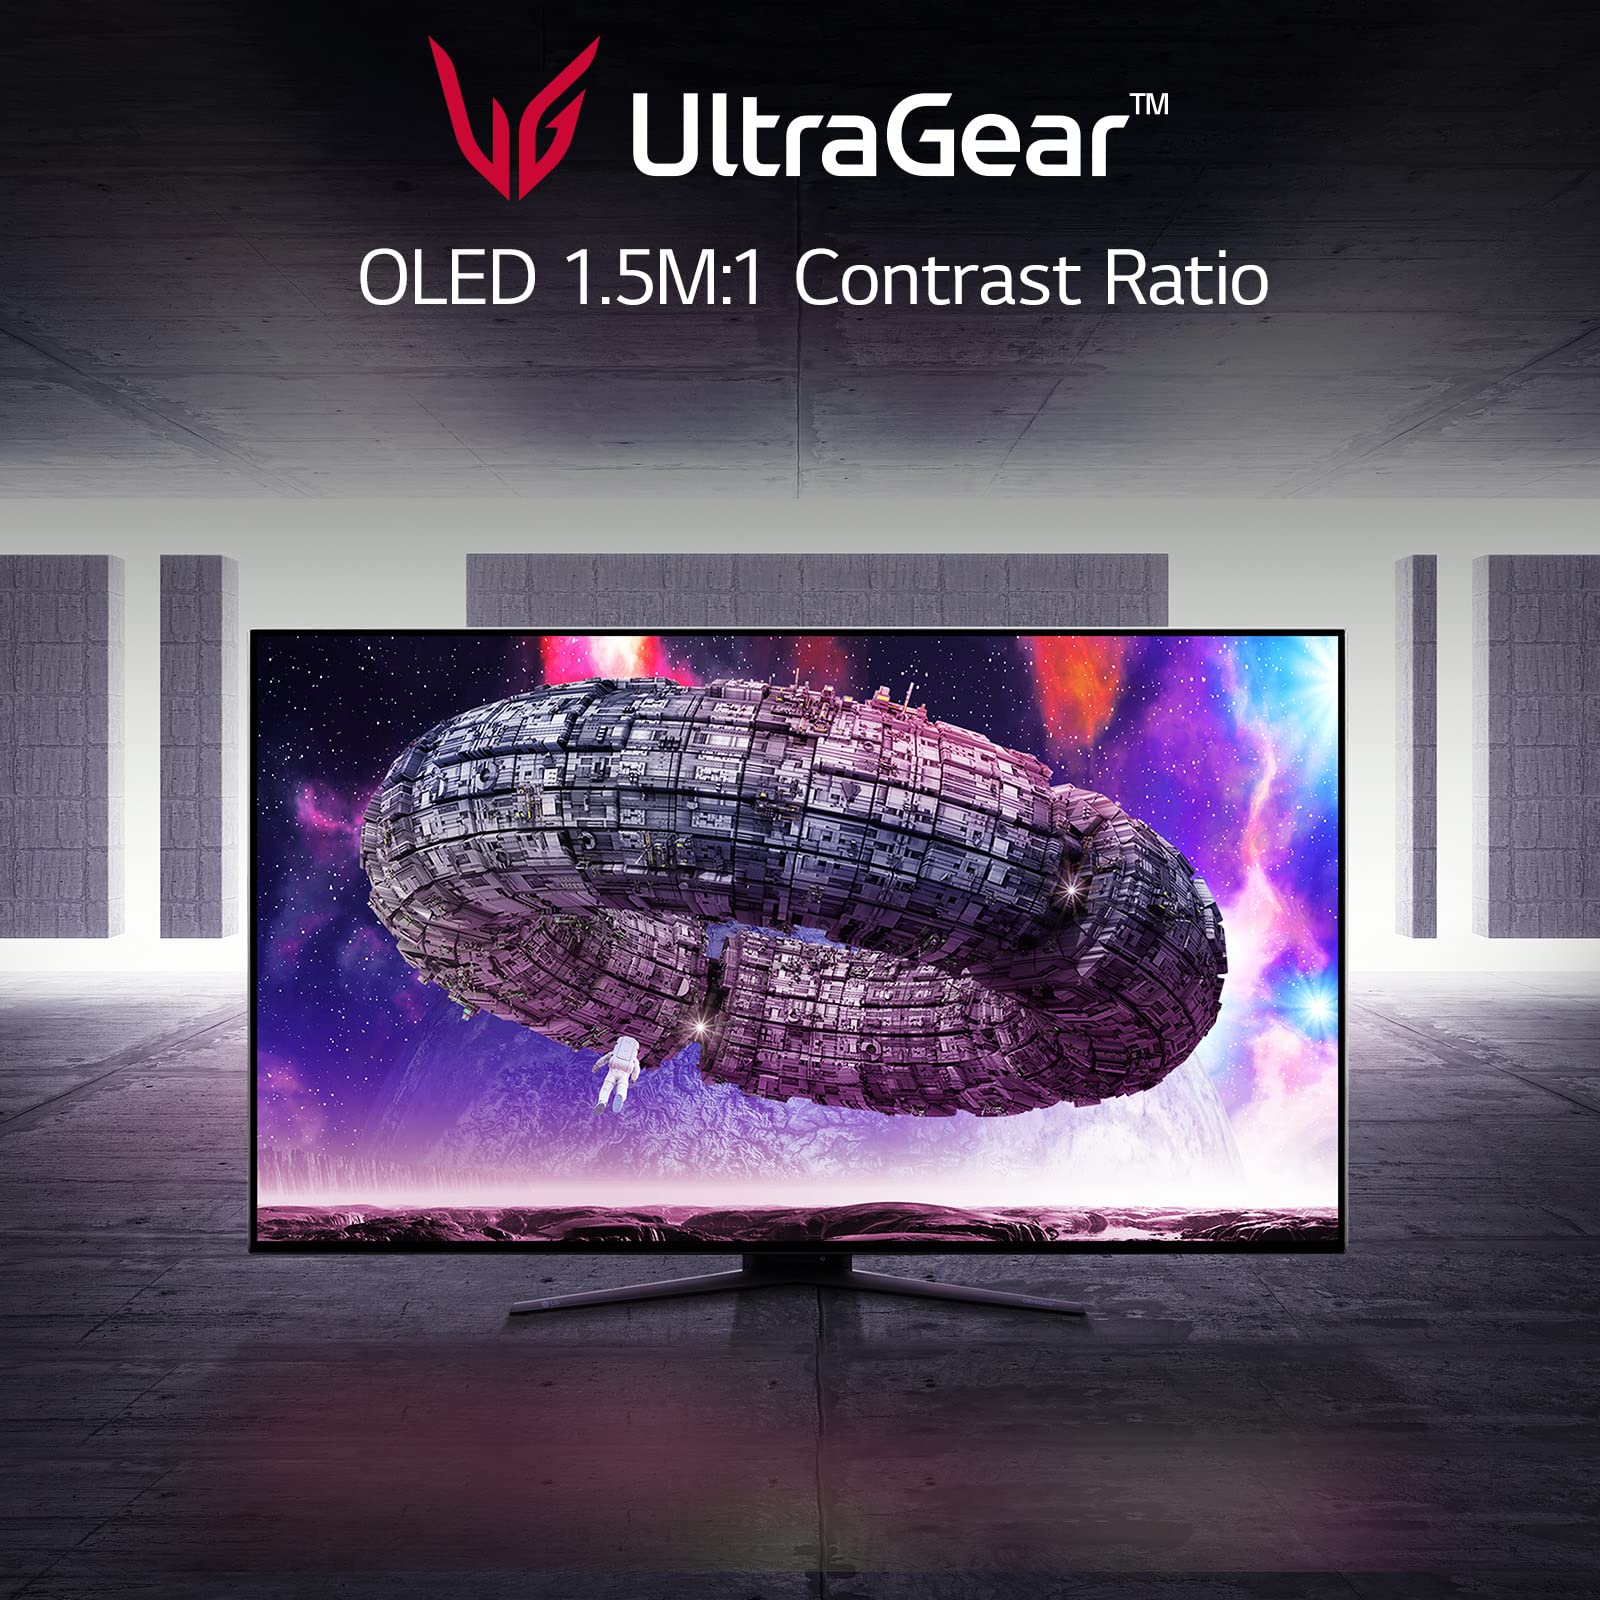 LG 48GQ900-B 48” Ultragear UHD OLED Gaming Monitor with Anti-Glare, 1.5M : 1 Contrast Ratio & DCI-P3 99% (Typ.) with HDR 10, .1ms (GtG) 120Hz Refresh Rate, HDMI 2.1 $852.14